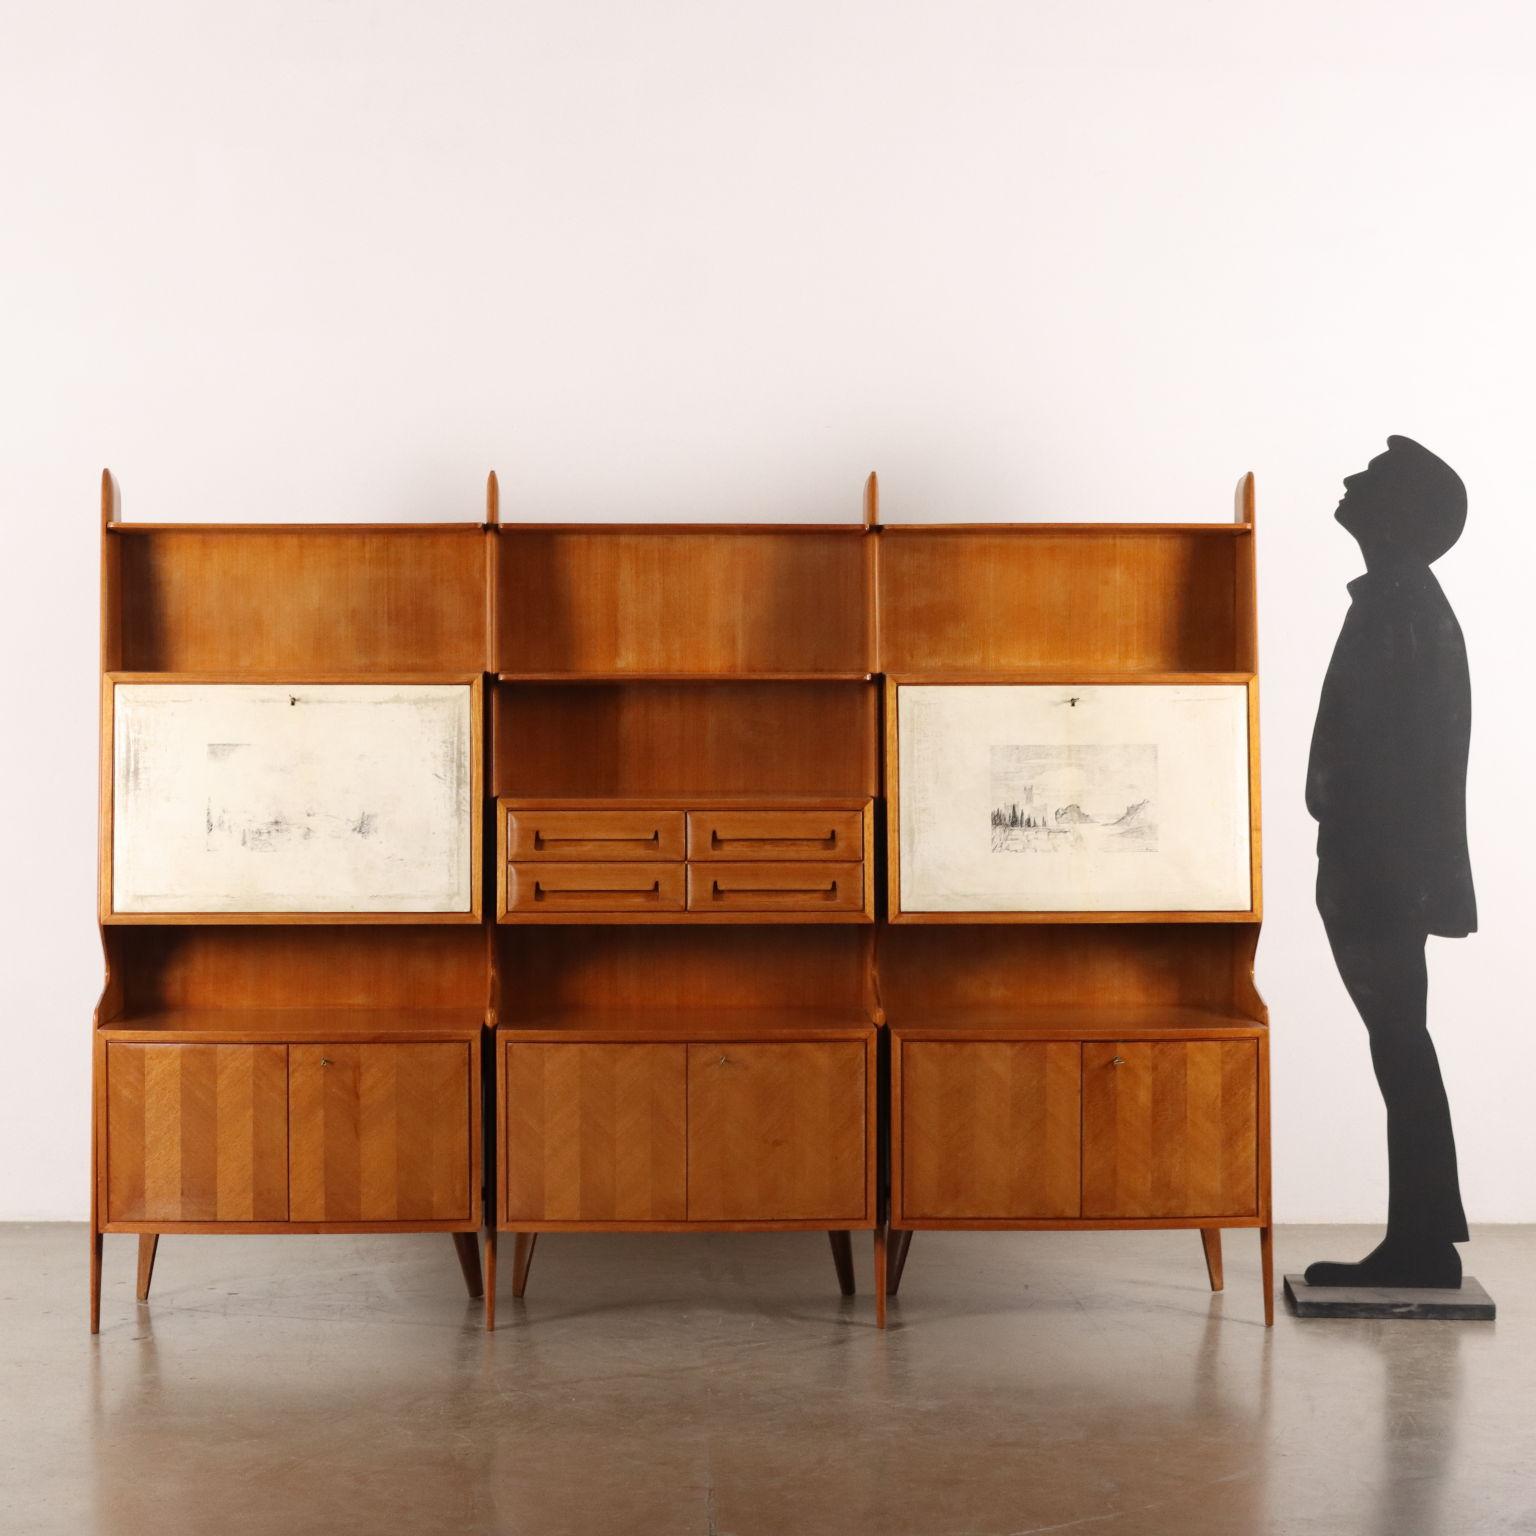 Cabinet with hinged doors, flaps and drawers. Mahogany veneered wood and parchement paper decoration.